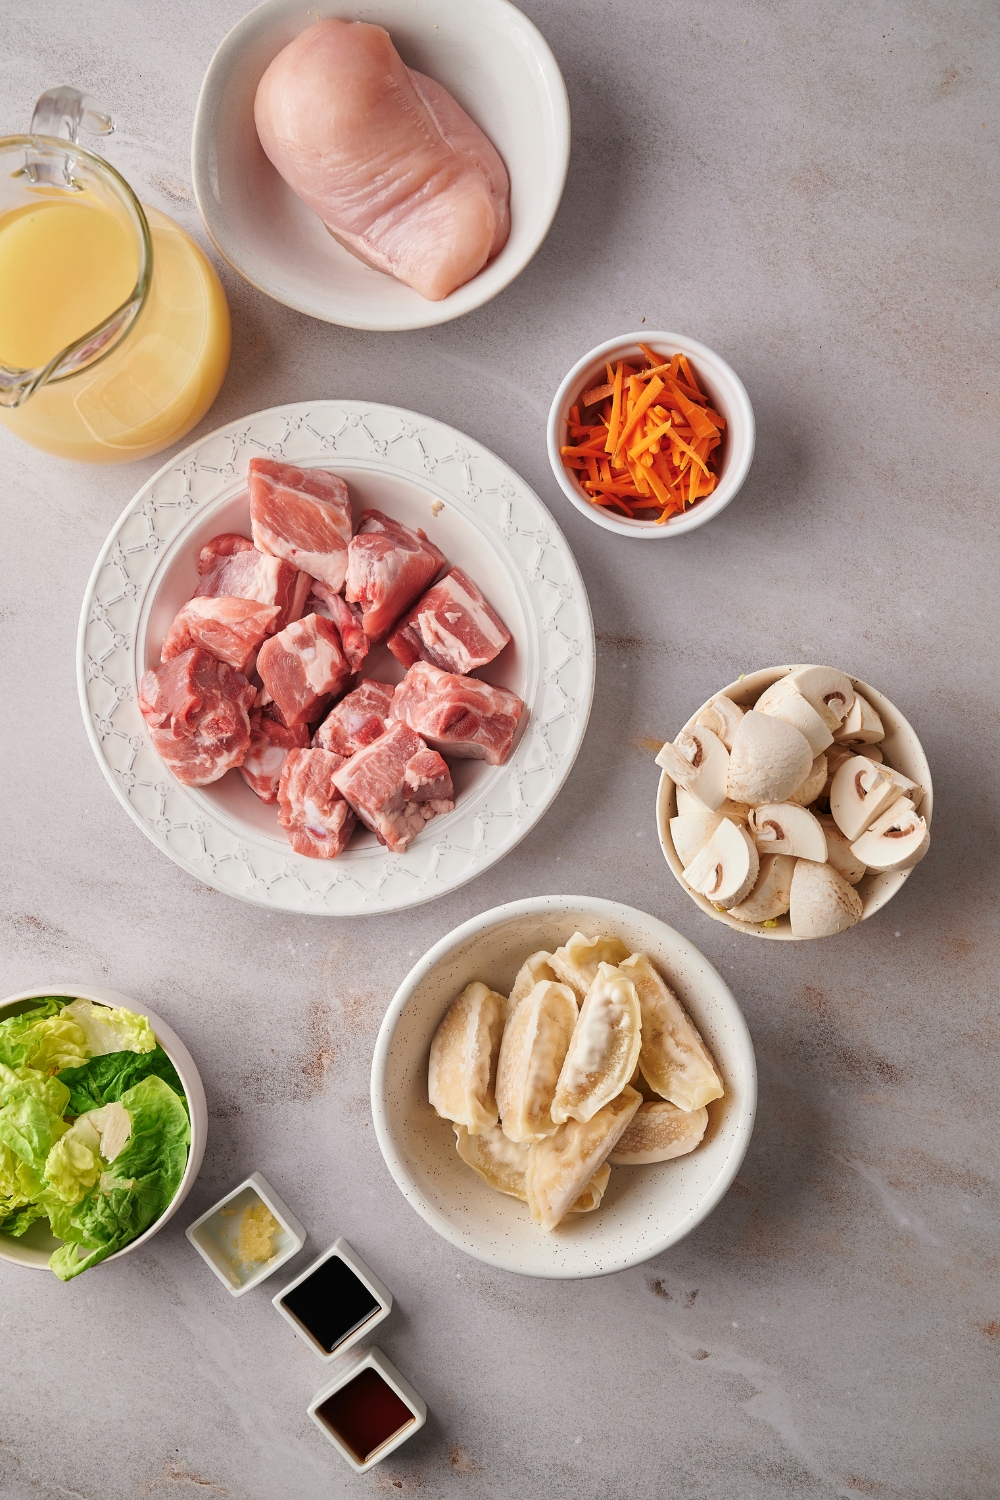 Bowl of cubed pork, a bowl of carrots, bowl with a chicken breast in it, a bowl of wontons, a bowl of soy sauce, a bowl of garlic, a bowl of lettuce, and a bowl of sesame oil all on a gray counter.